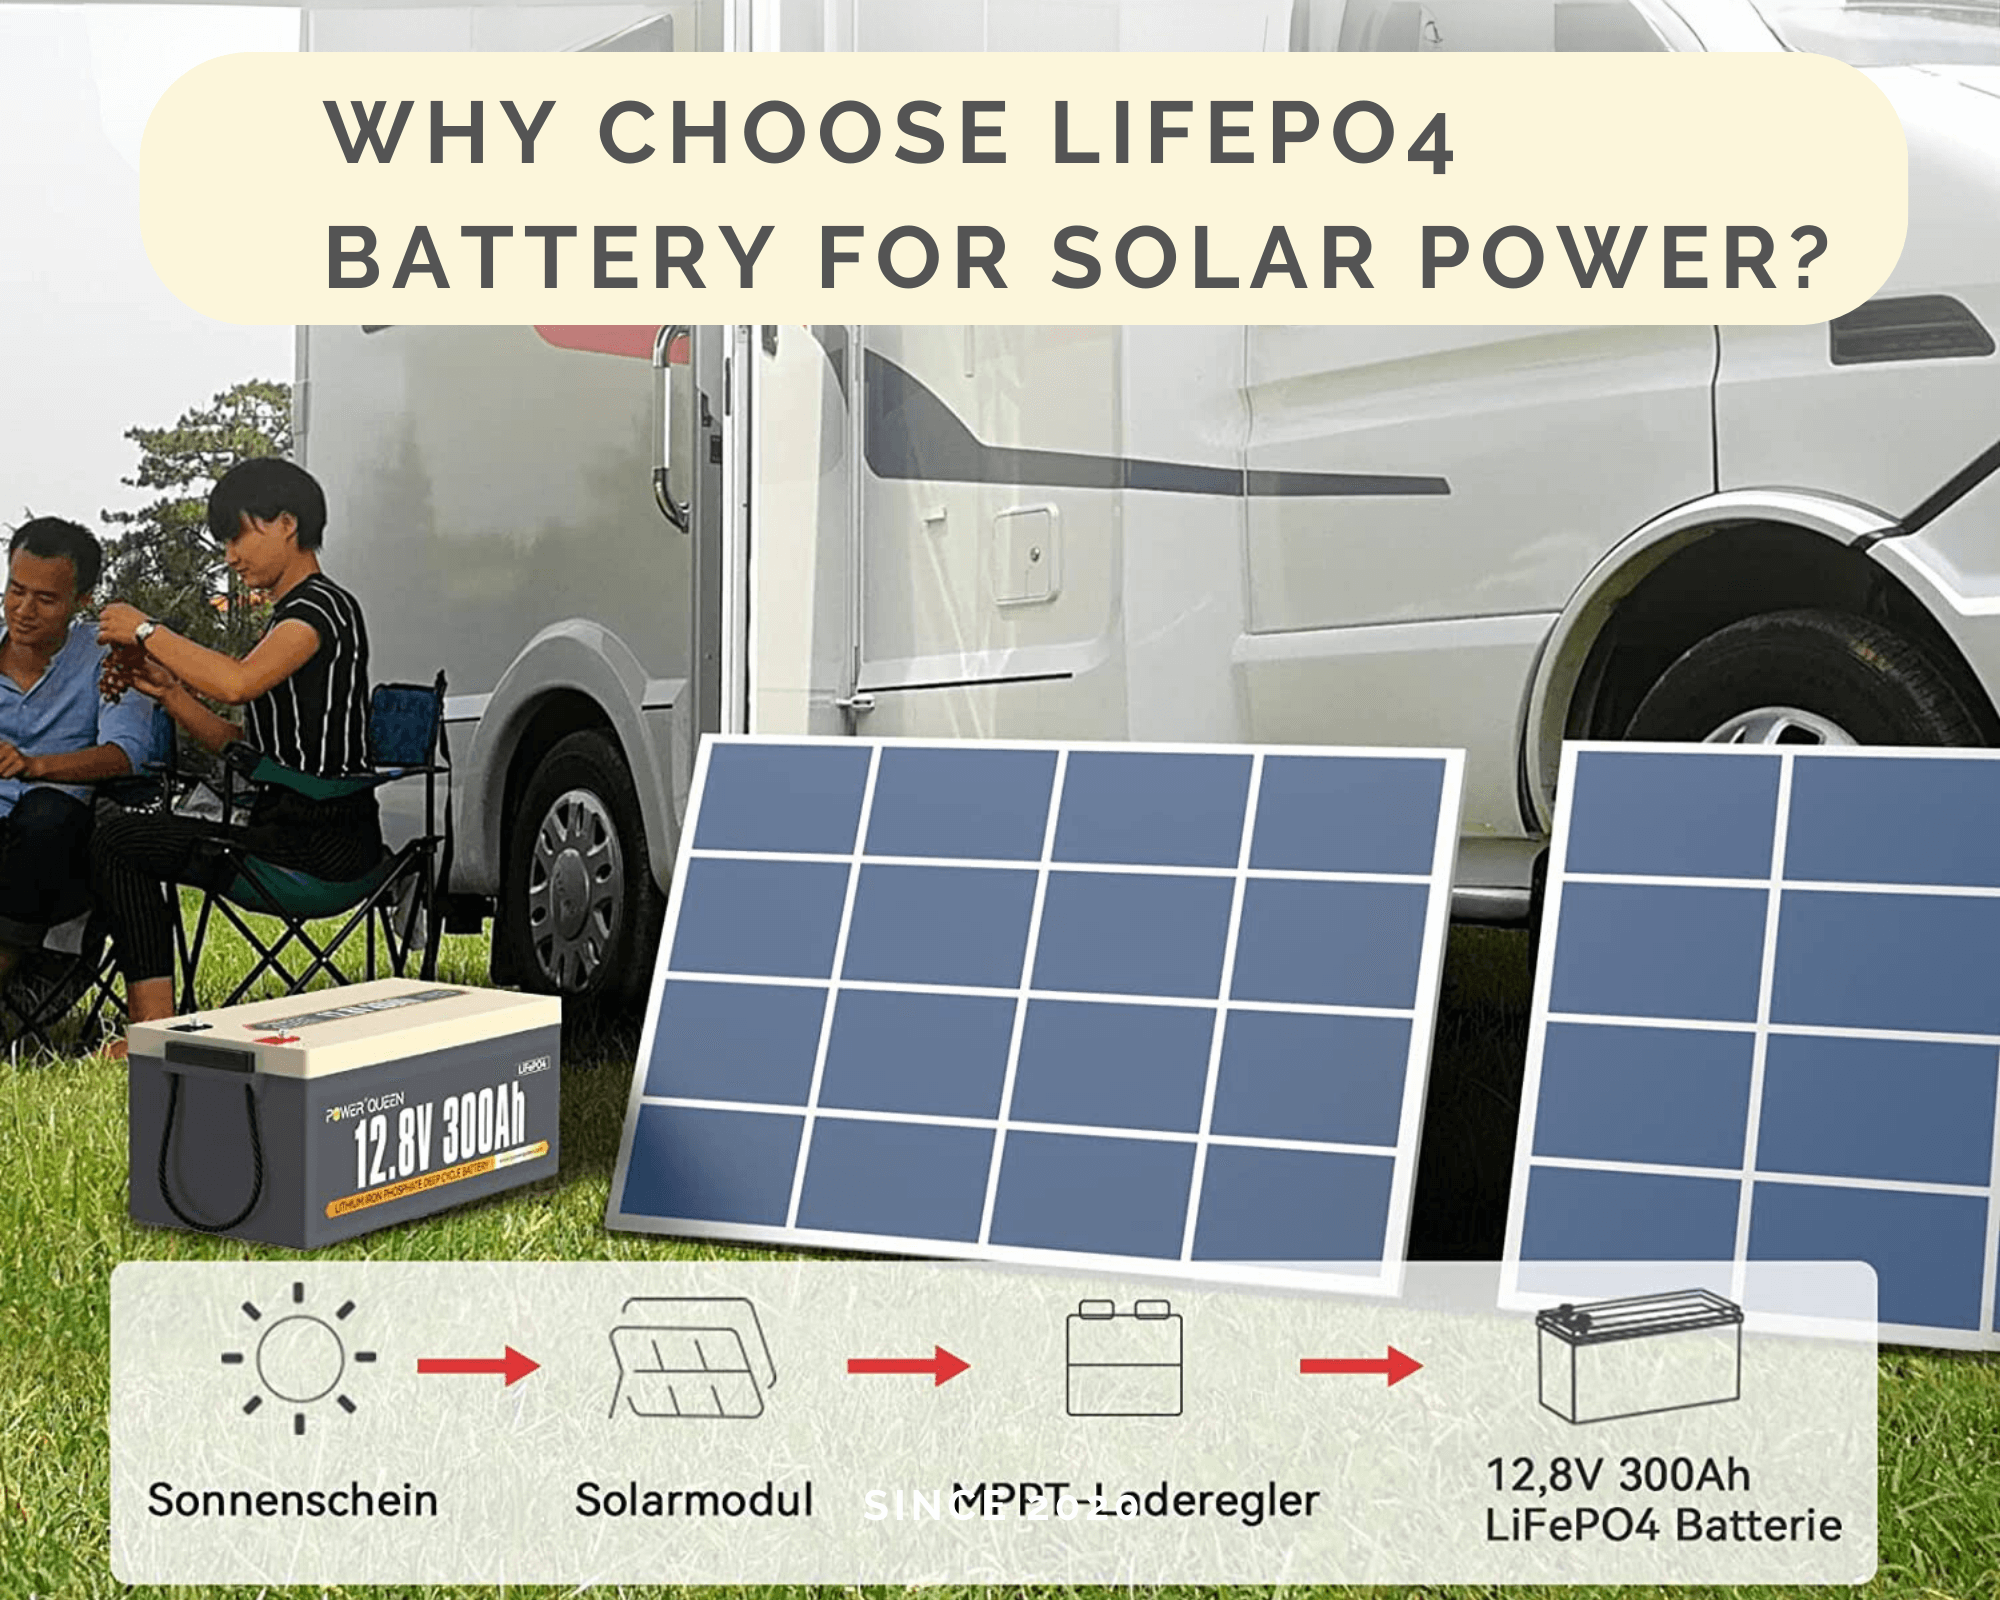 Why Choose LiFePO4 Battery For Solar Power?